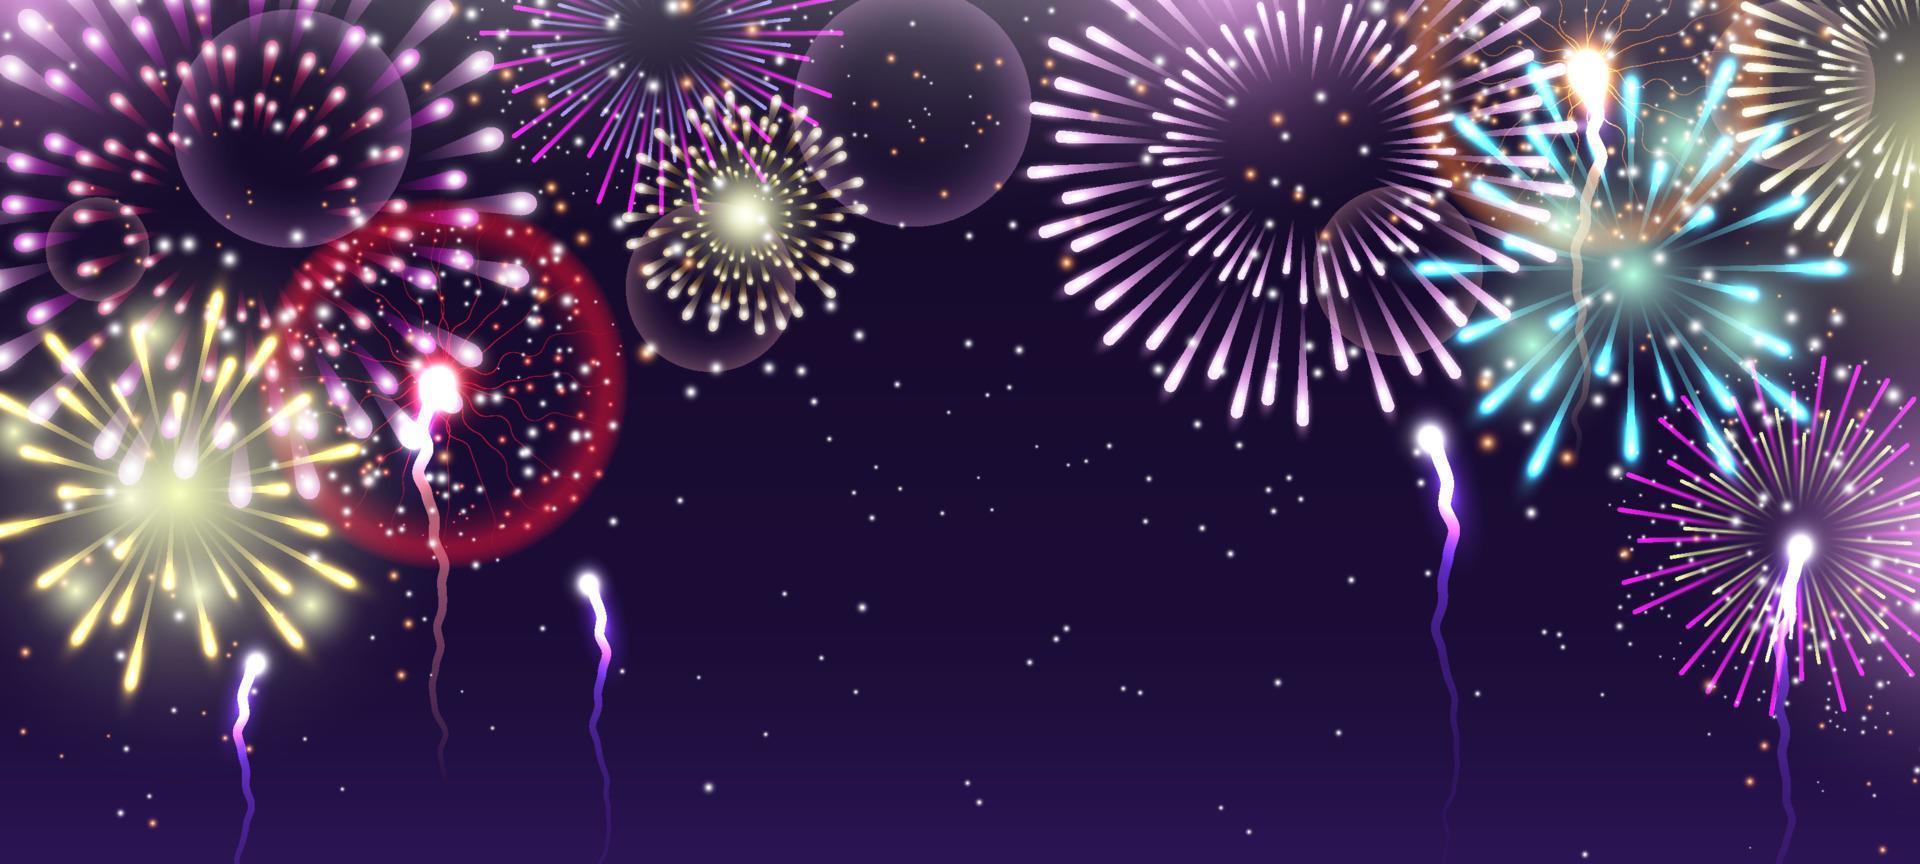 Colorful Fireworks Background vector